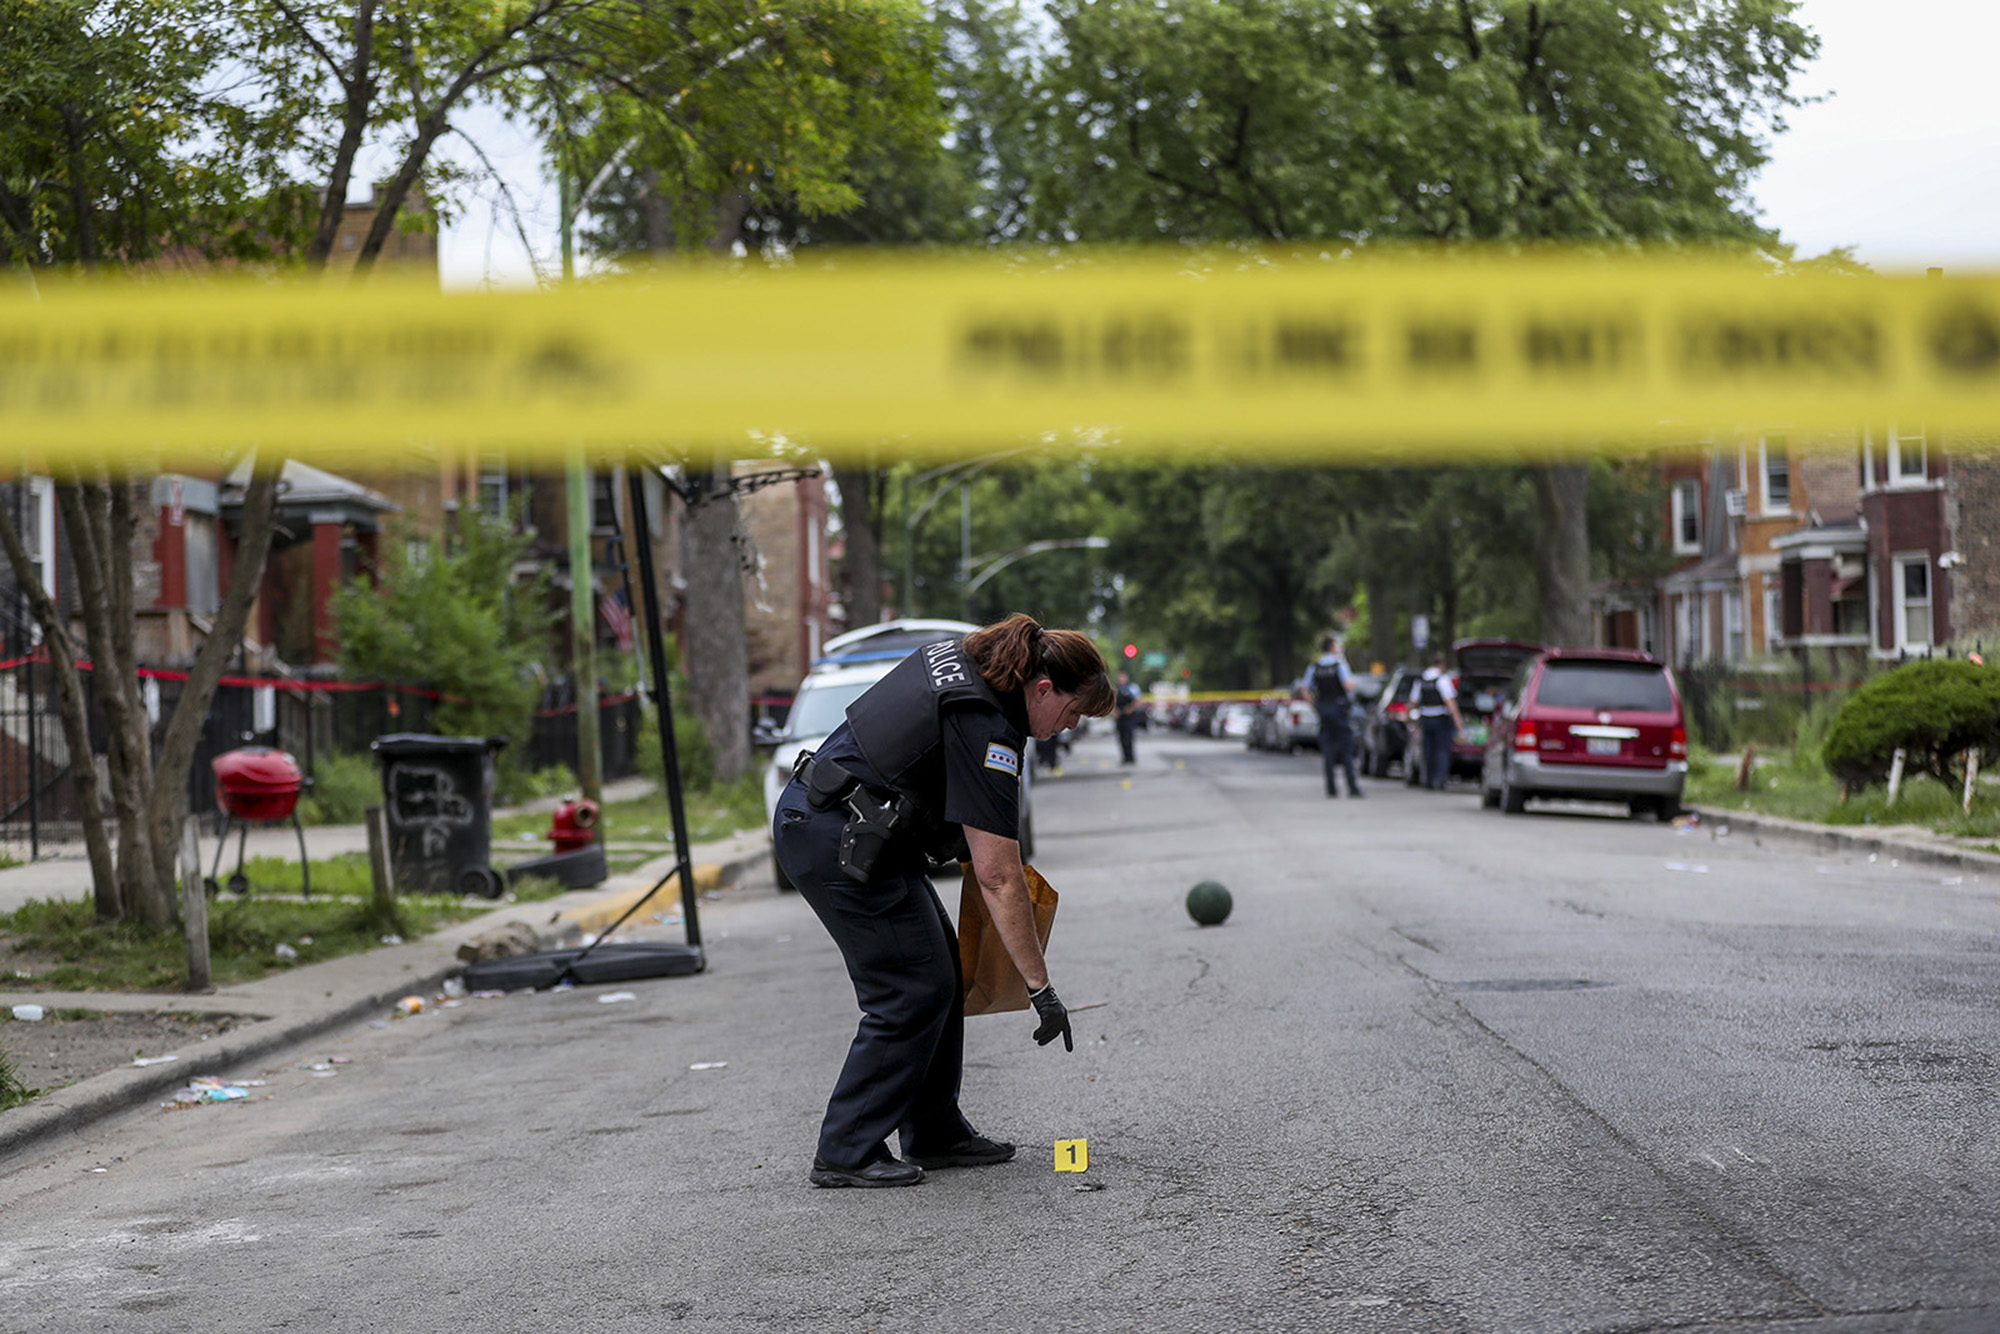 An officer collects evidence at the scene where an 8-year-old girl was shot on the 1000 block of North Monticello Avenue on Aug. 11, 2019 in Chicago. (Armando L. Sanchez—Chicago Tribune/Getty Images)